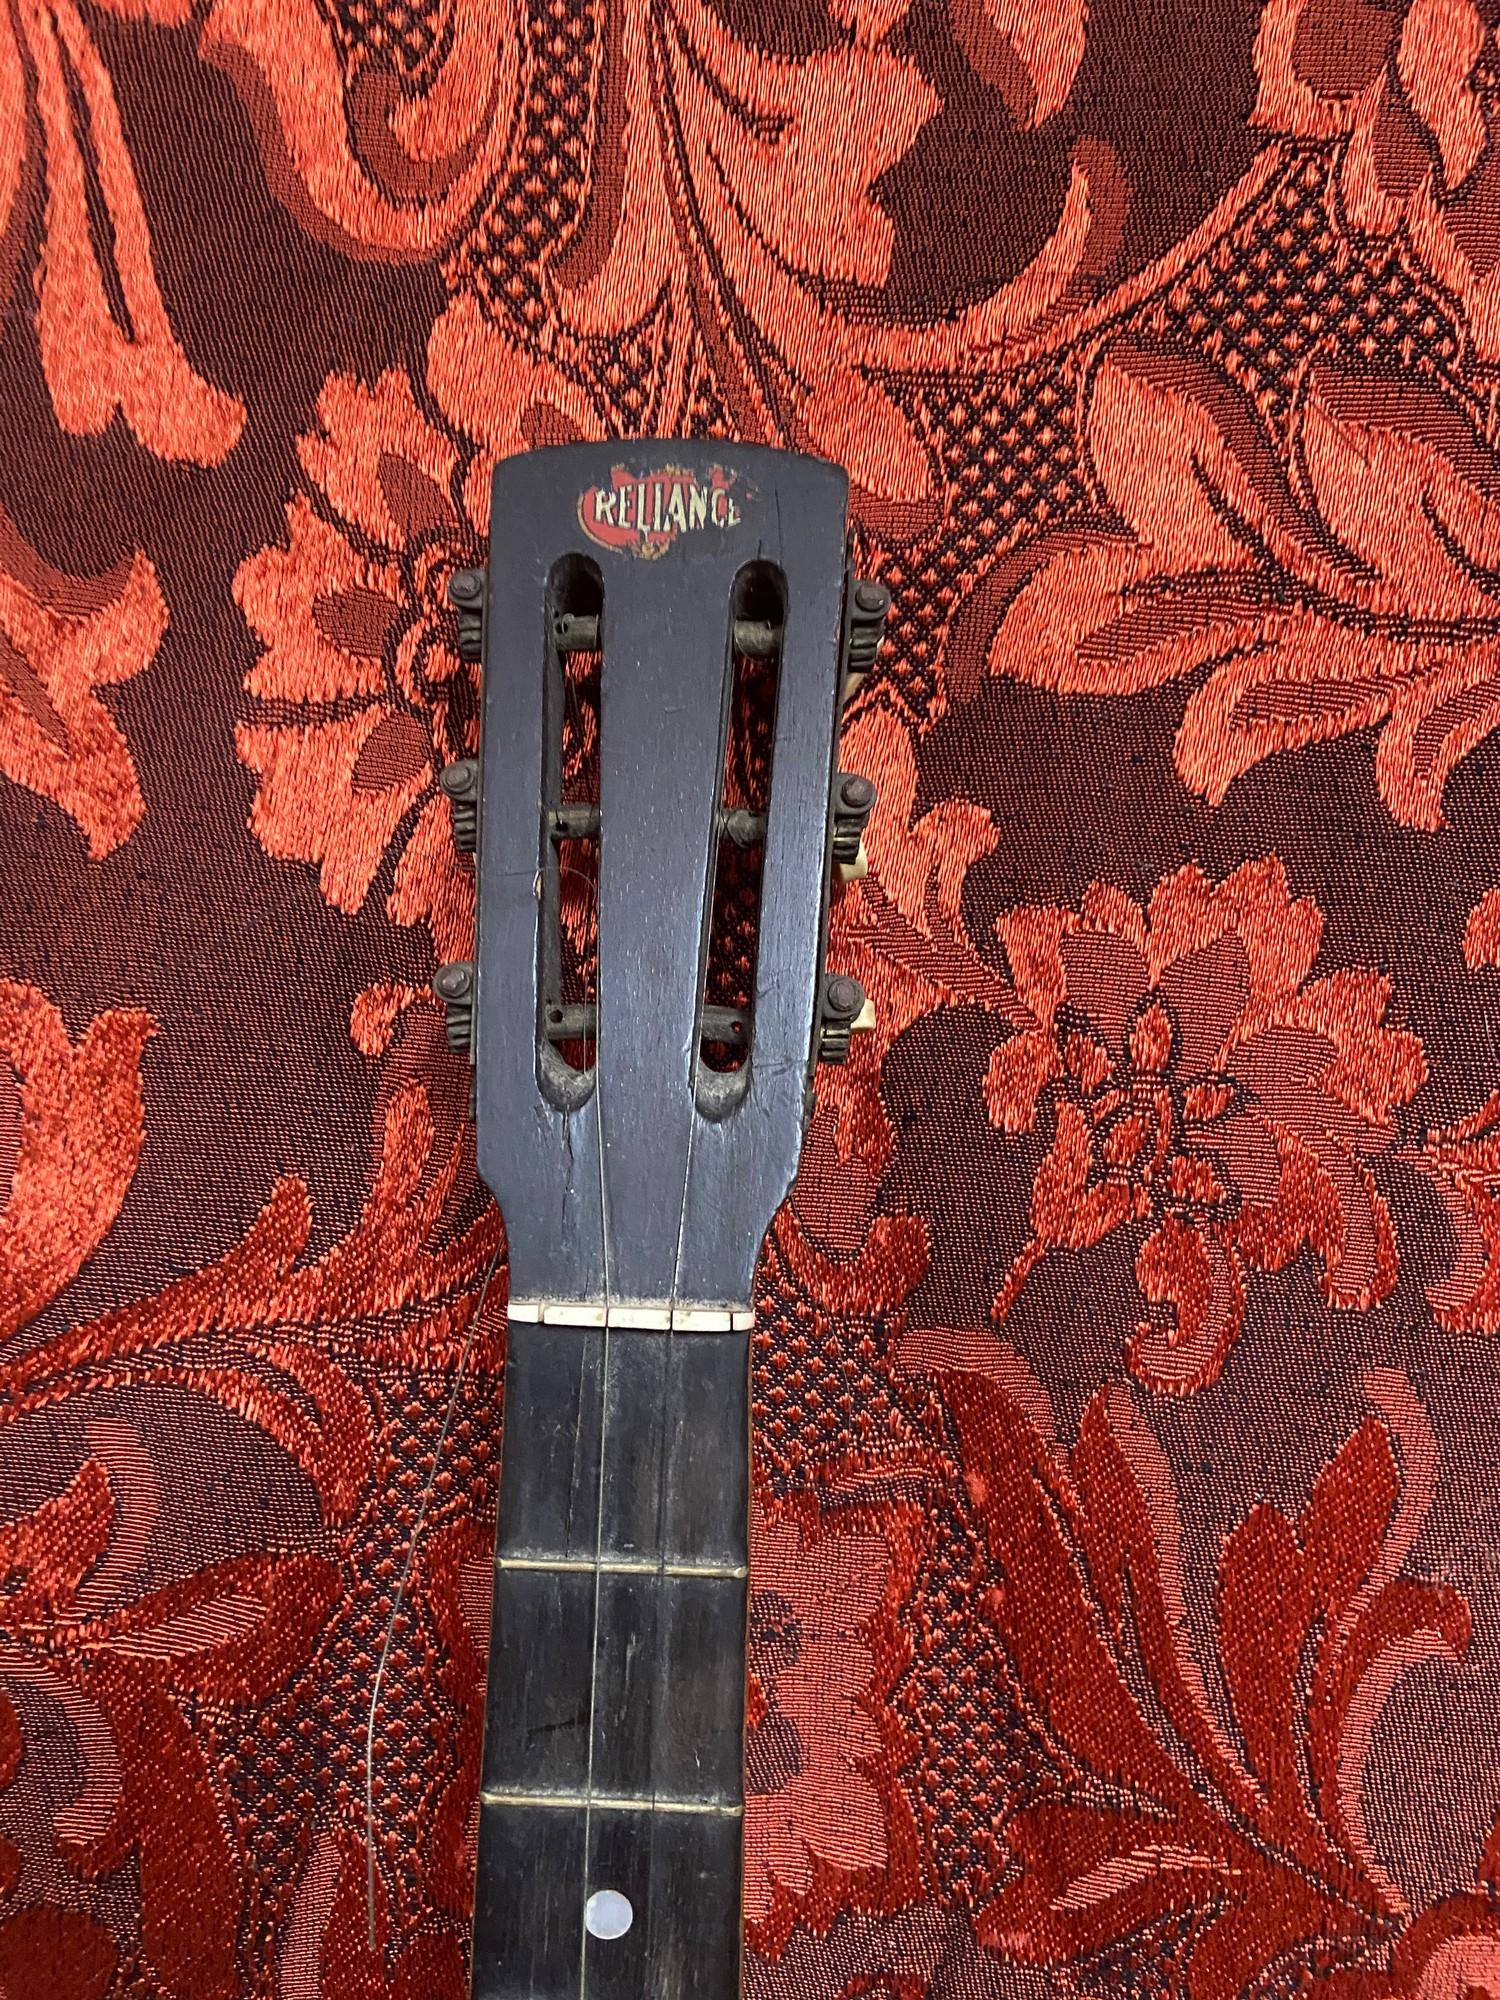 A Vintage 6 string banjo produced by Reliance. - Image 2 of 4